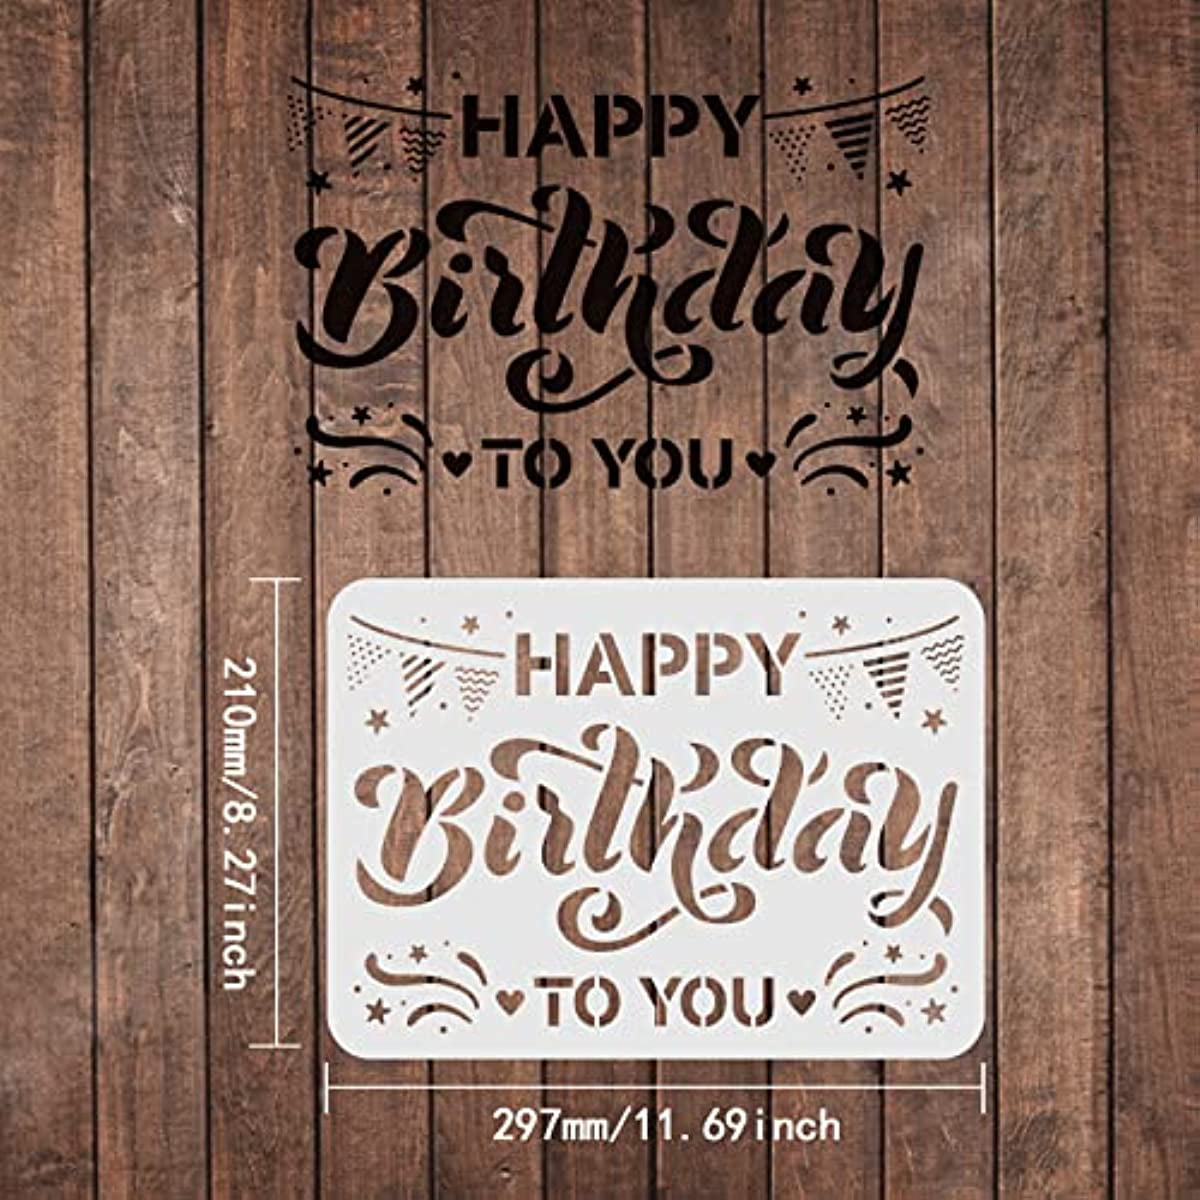 Happy Birthday Stencil Paint Cards Journaling Reusable Crafts Art QU63 